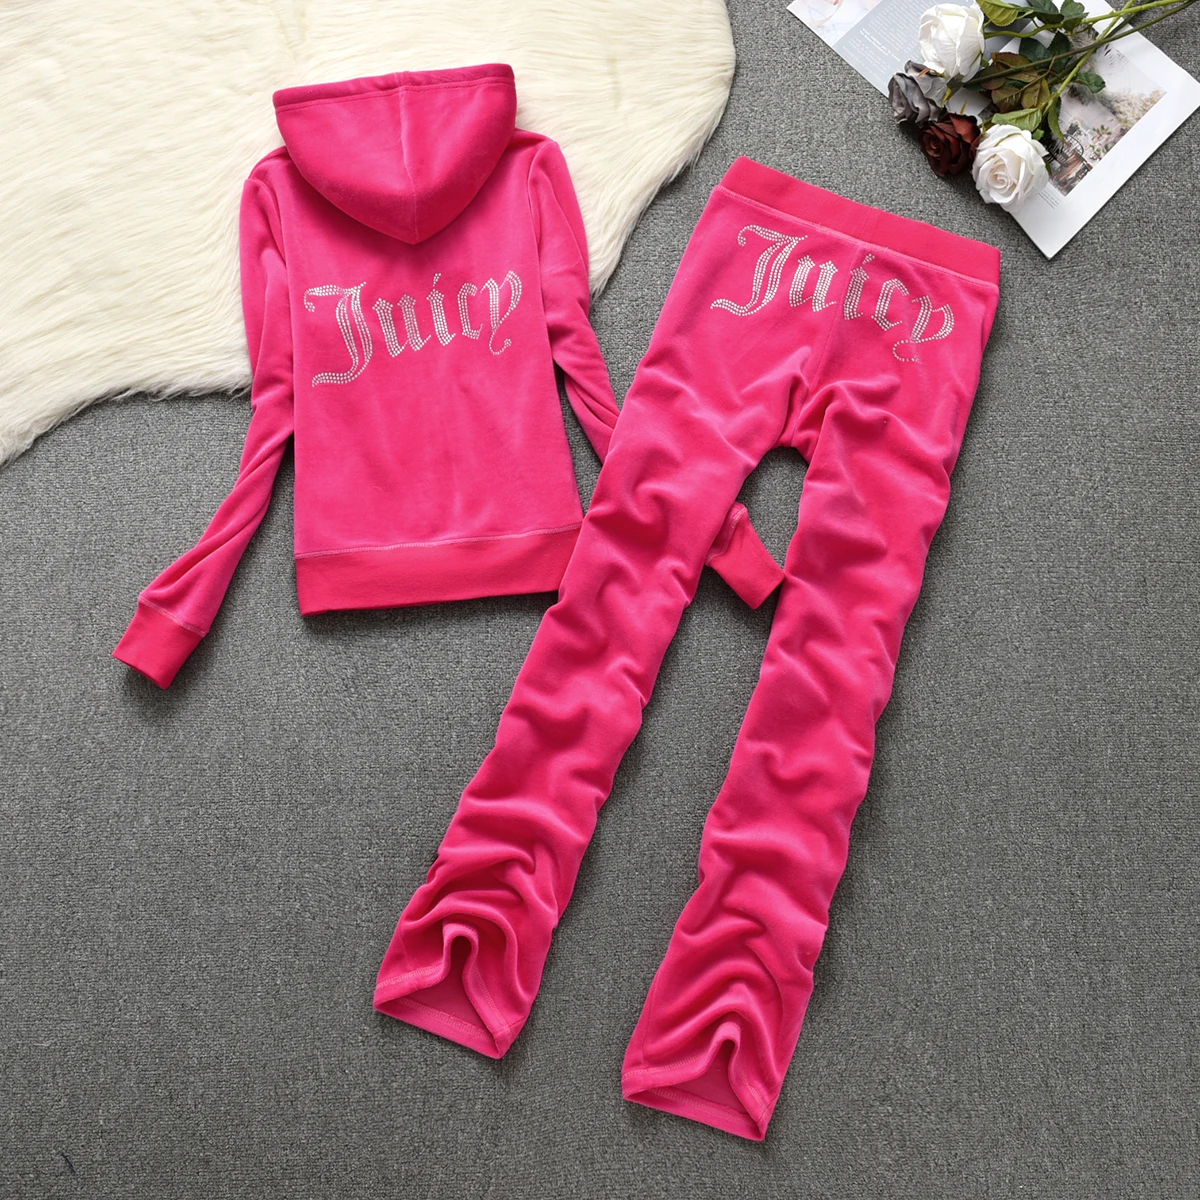 Women's Velvet Juicy Coutoure Tracksuit Tight Fitting Sweatshirt and Pants Brand Fabric Tracksuit Velour Hoodies Juicy Tracksuit blazer and trouser set